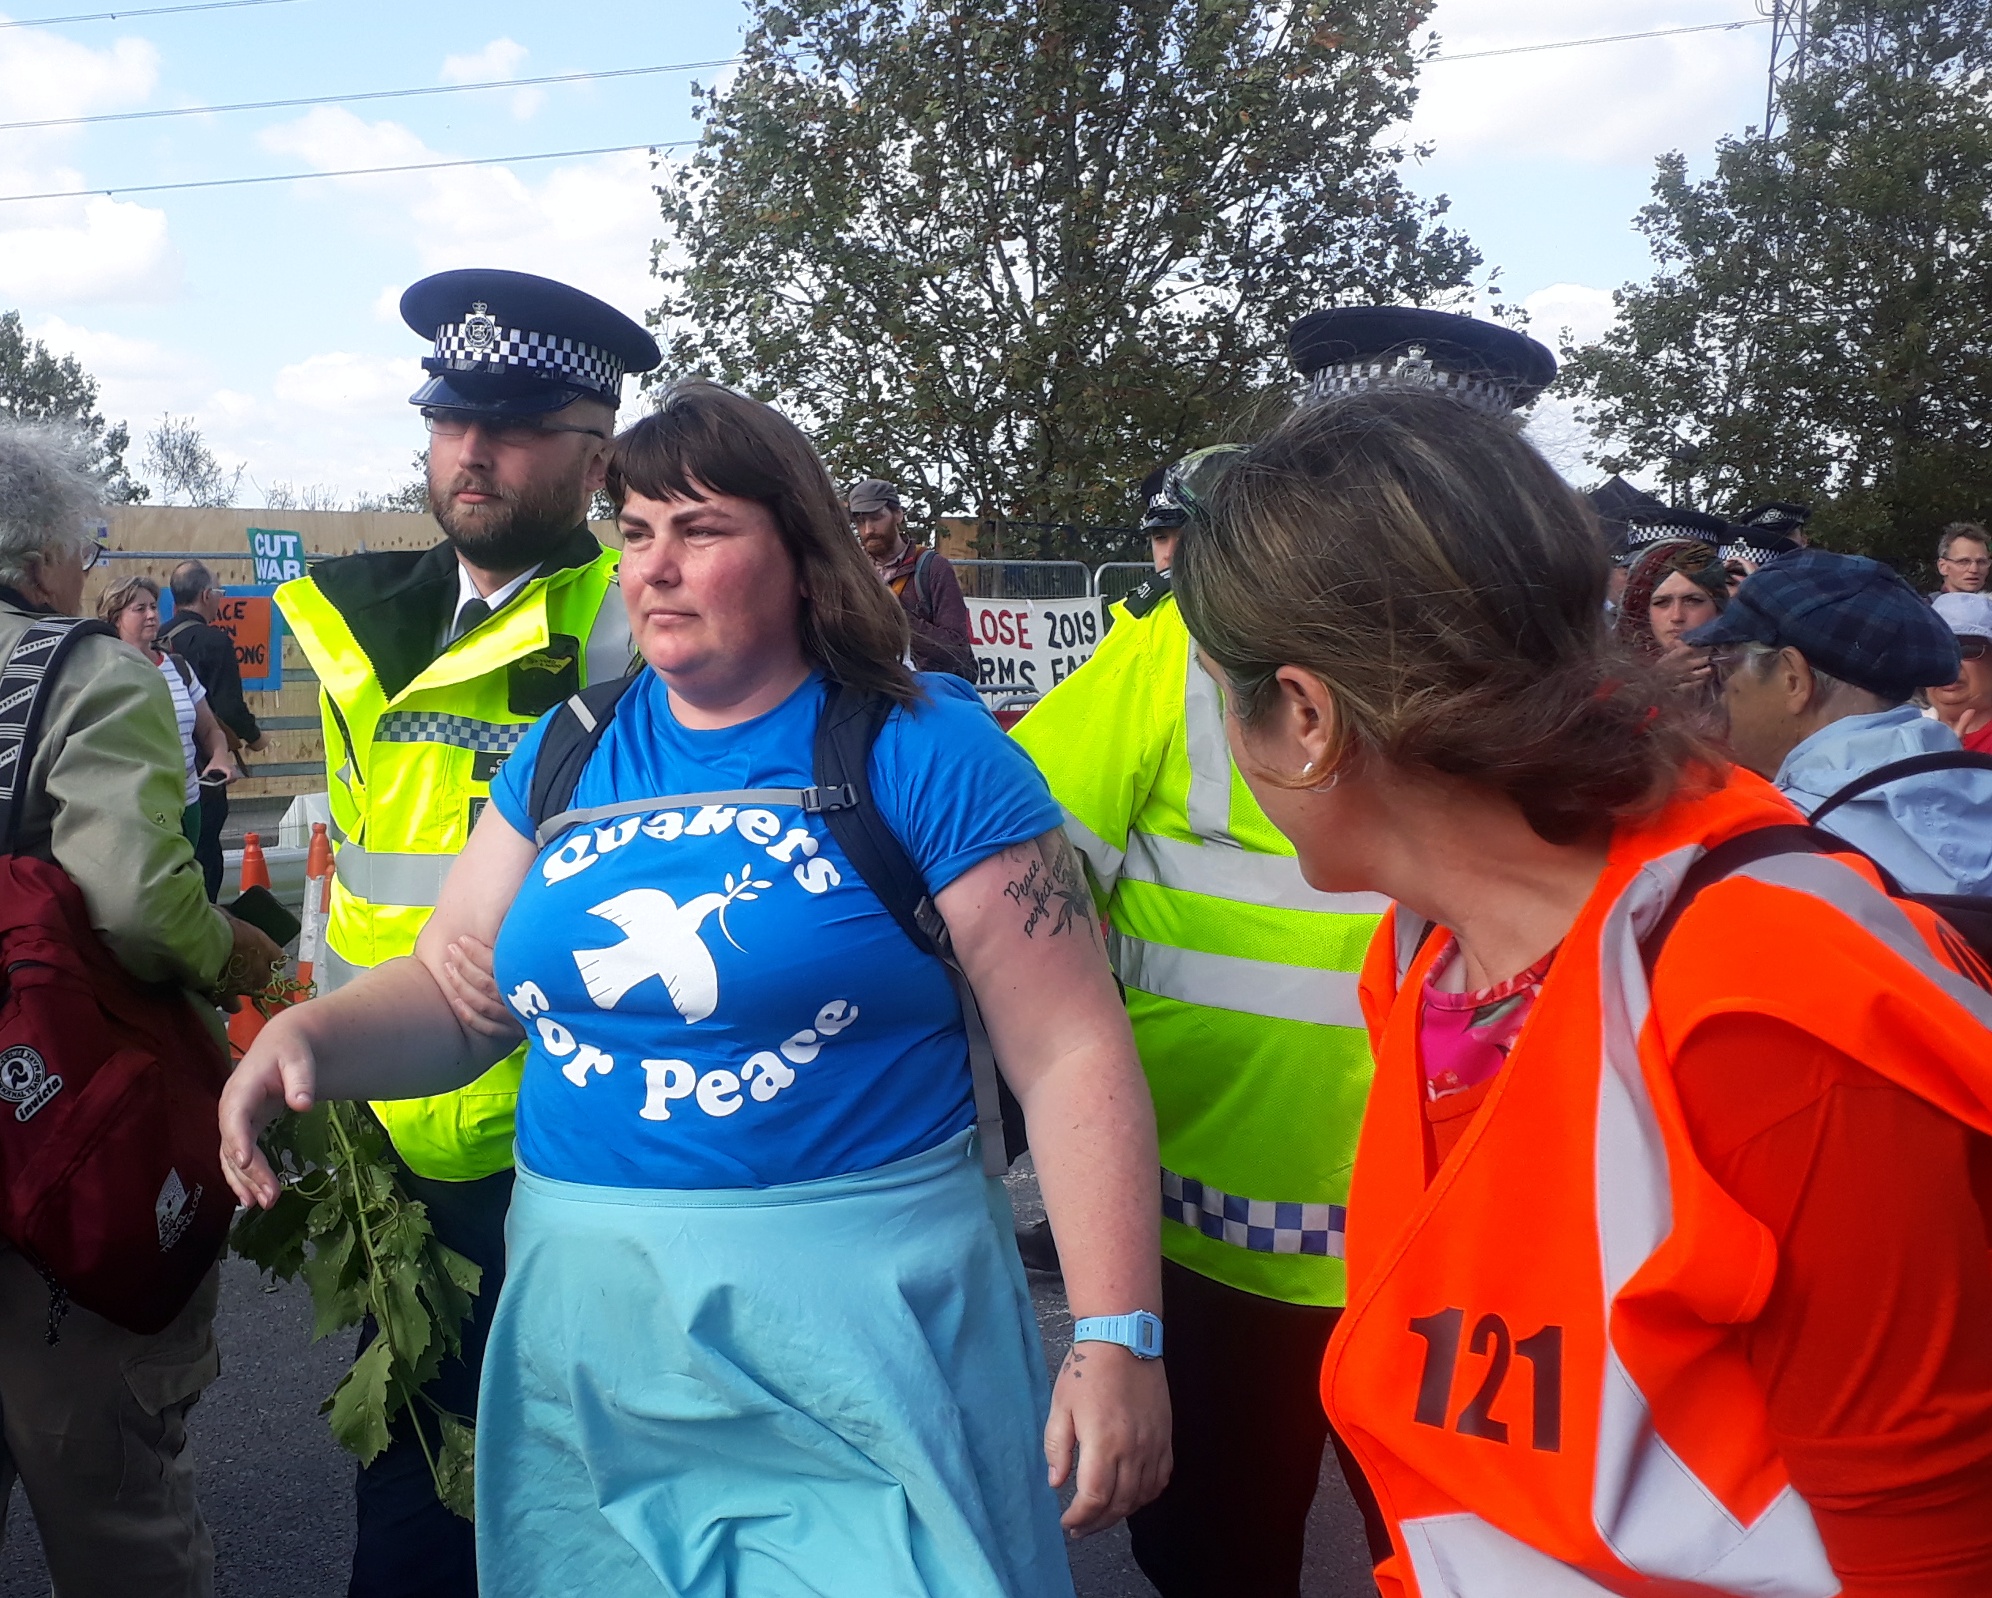 An activist with a 'Quakers for peace' t-shirt is held by the arms by two police officers on either side following her arrest on the No Faith in War day, 2019. A legal observer with a high-vis jacked on is talking to her.